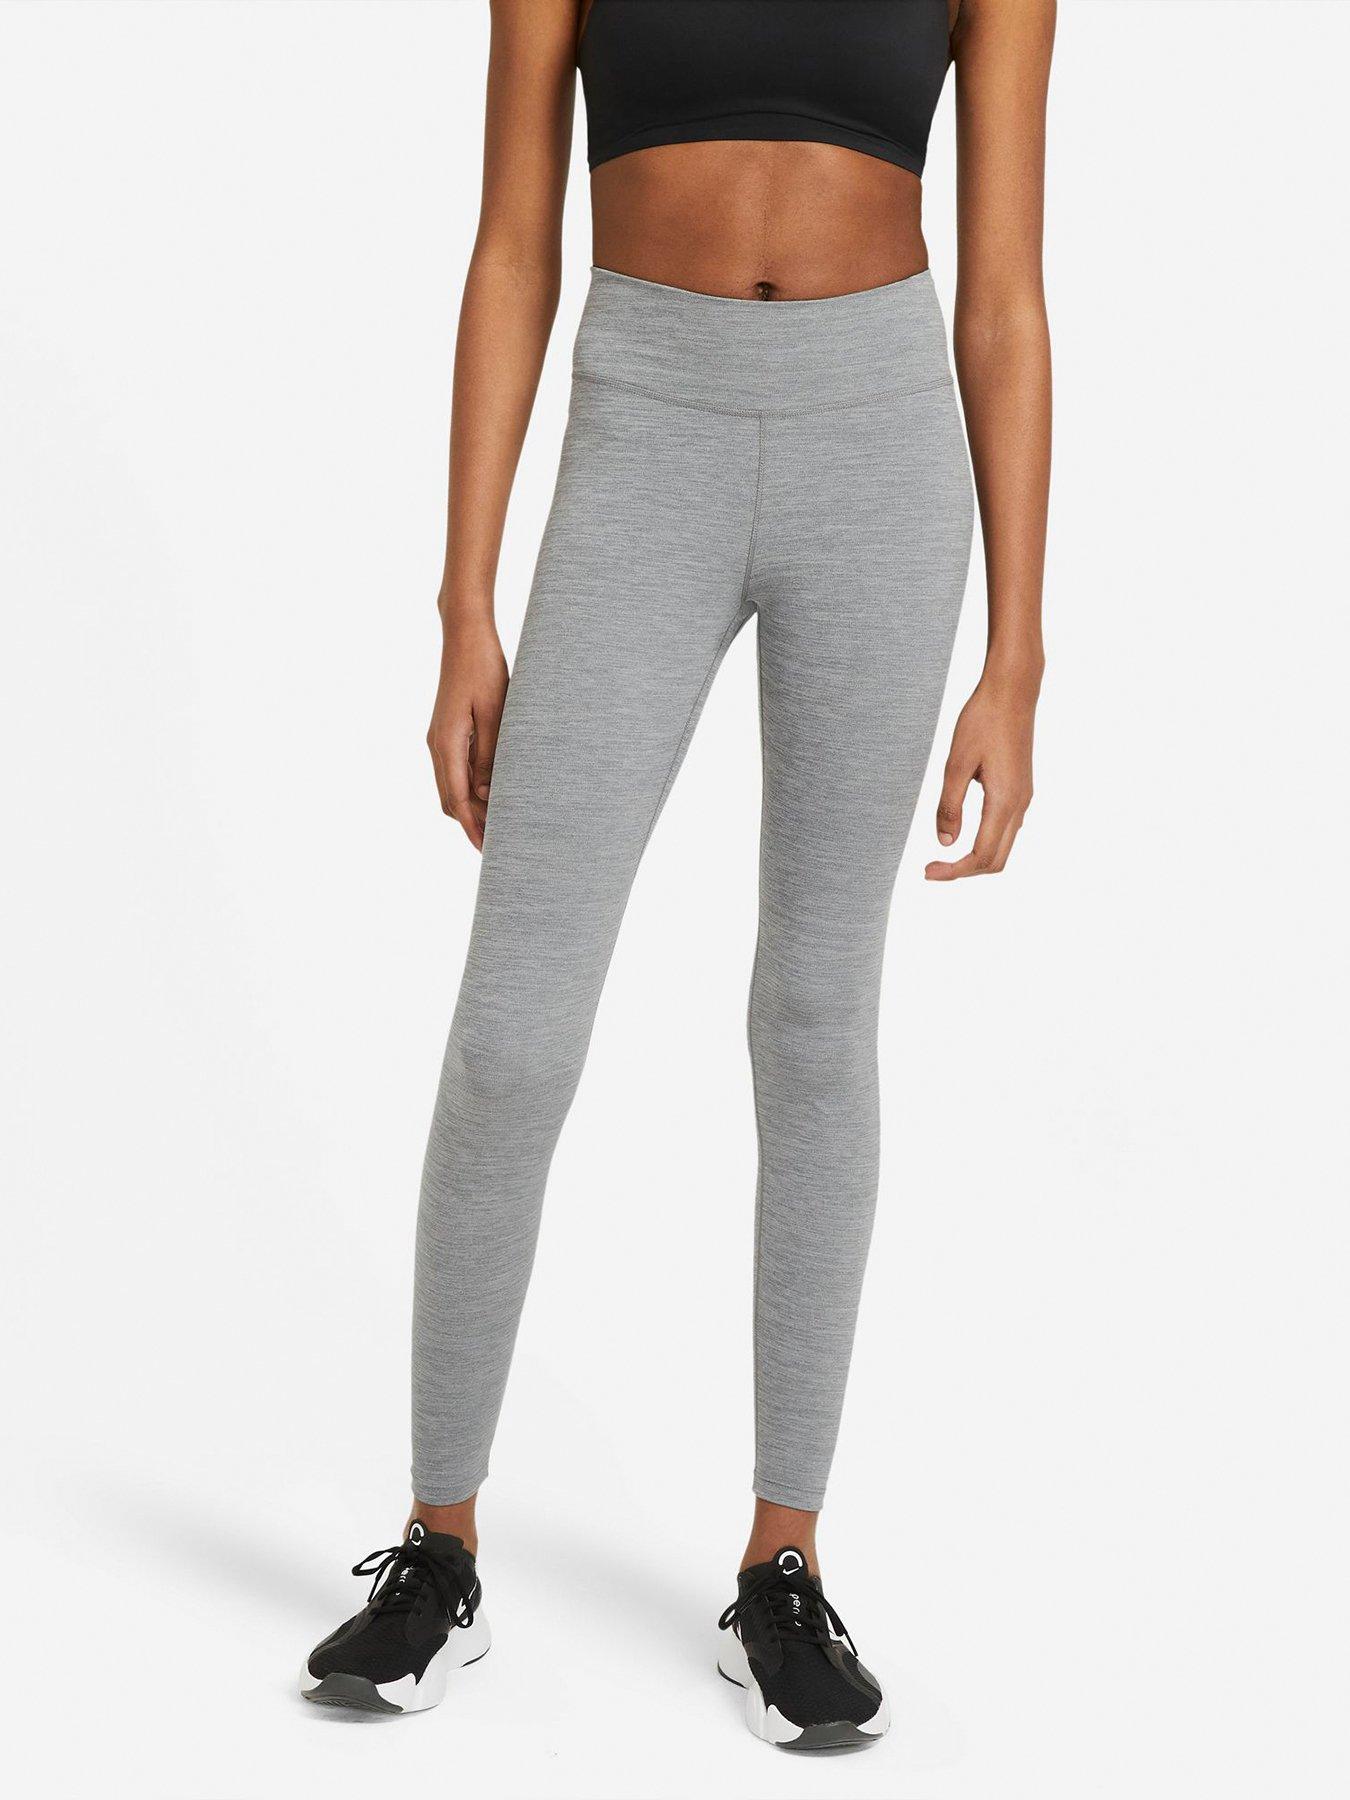 Dri-FIT One High Waisted Printed Tights - Grey Leopard